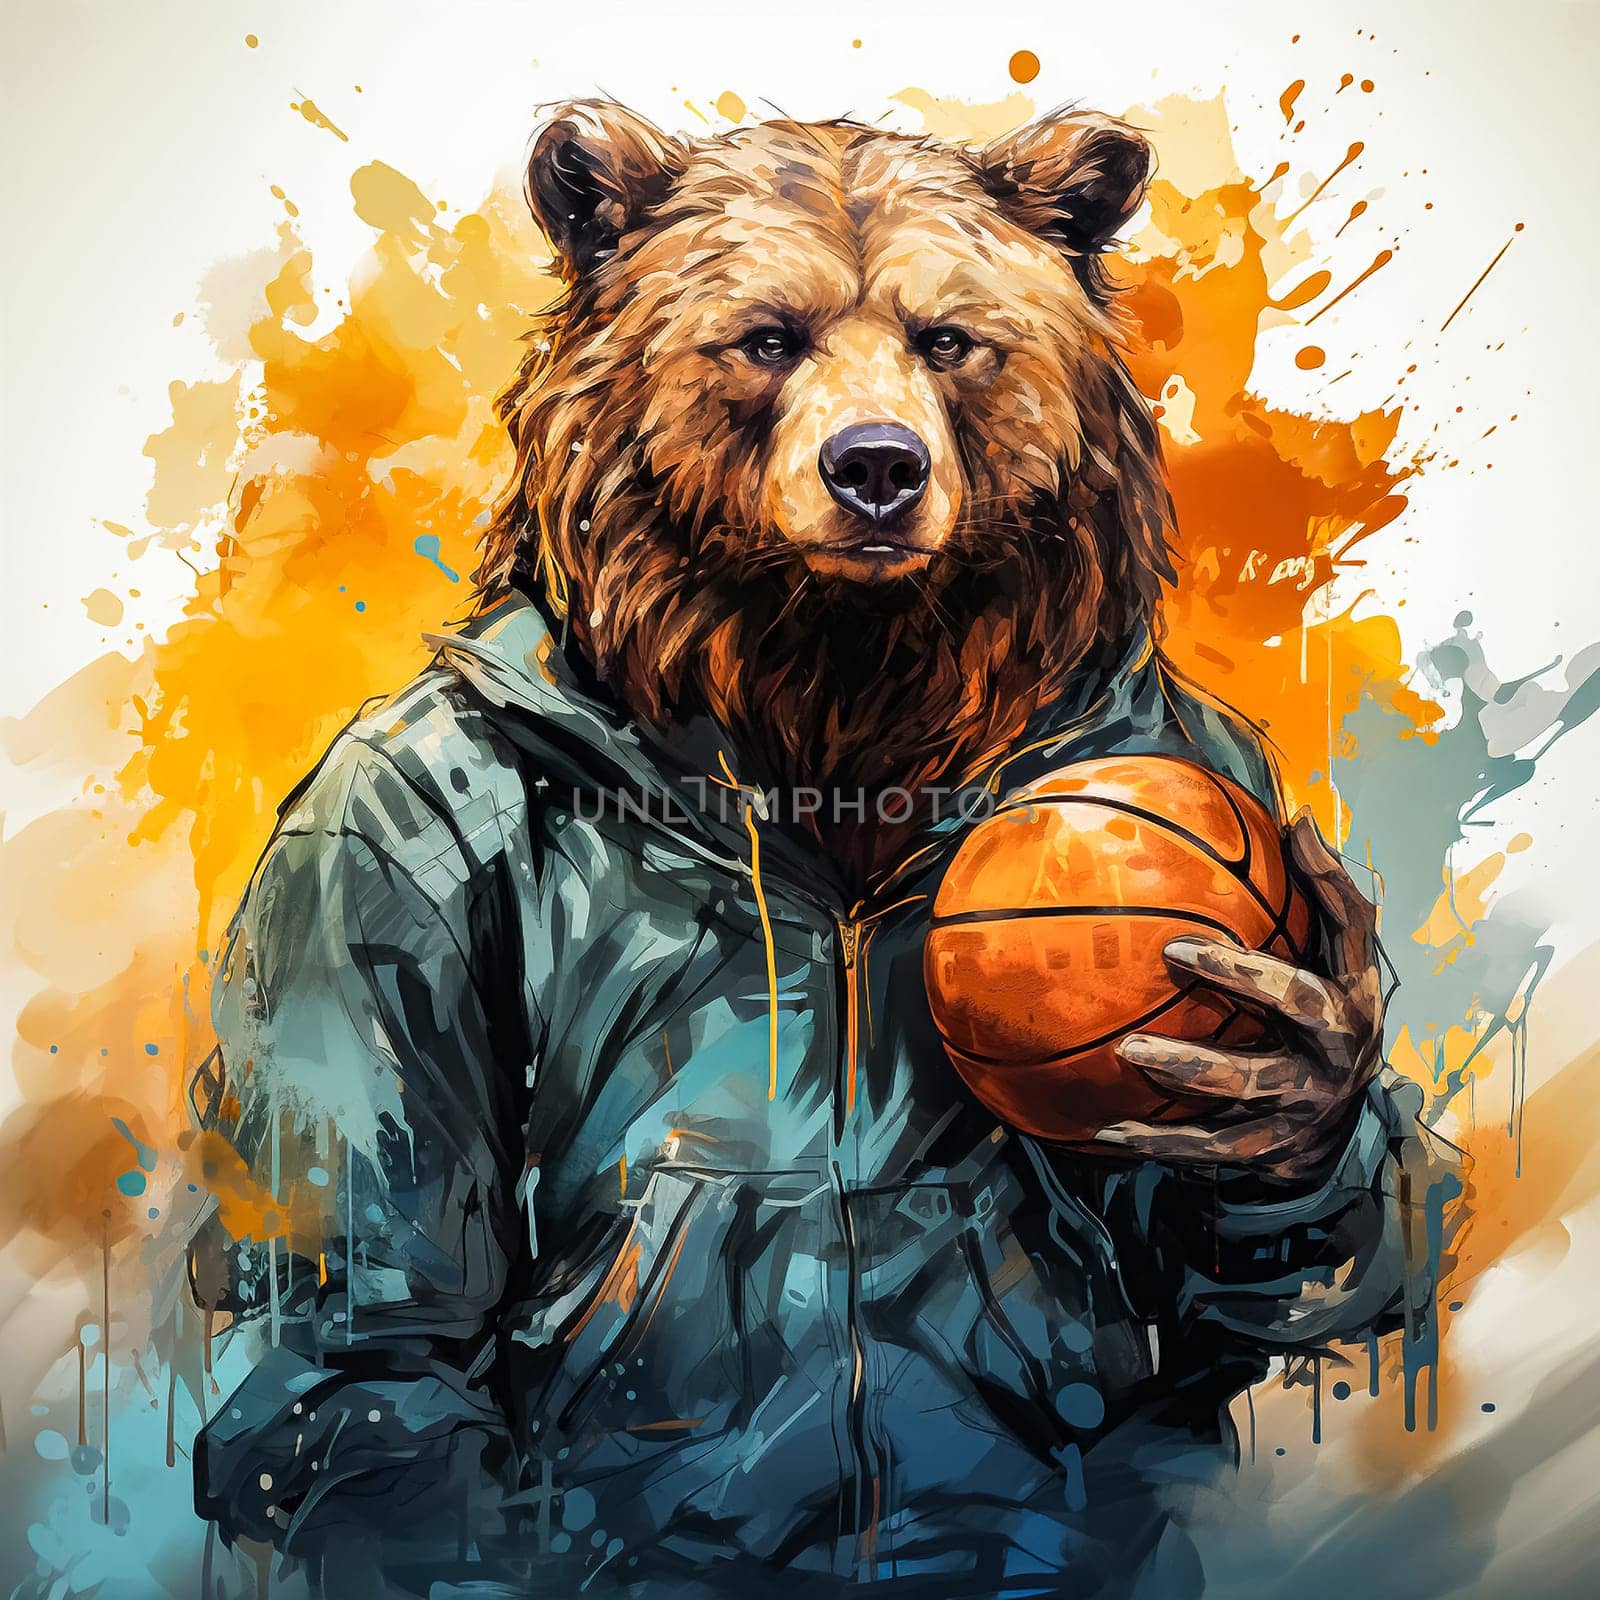 In a dynamic watercolor illustration, a bear exhibits athleticism by skillfully playing basketball, capturing the excitement of the sport in vibrant hues.